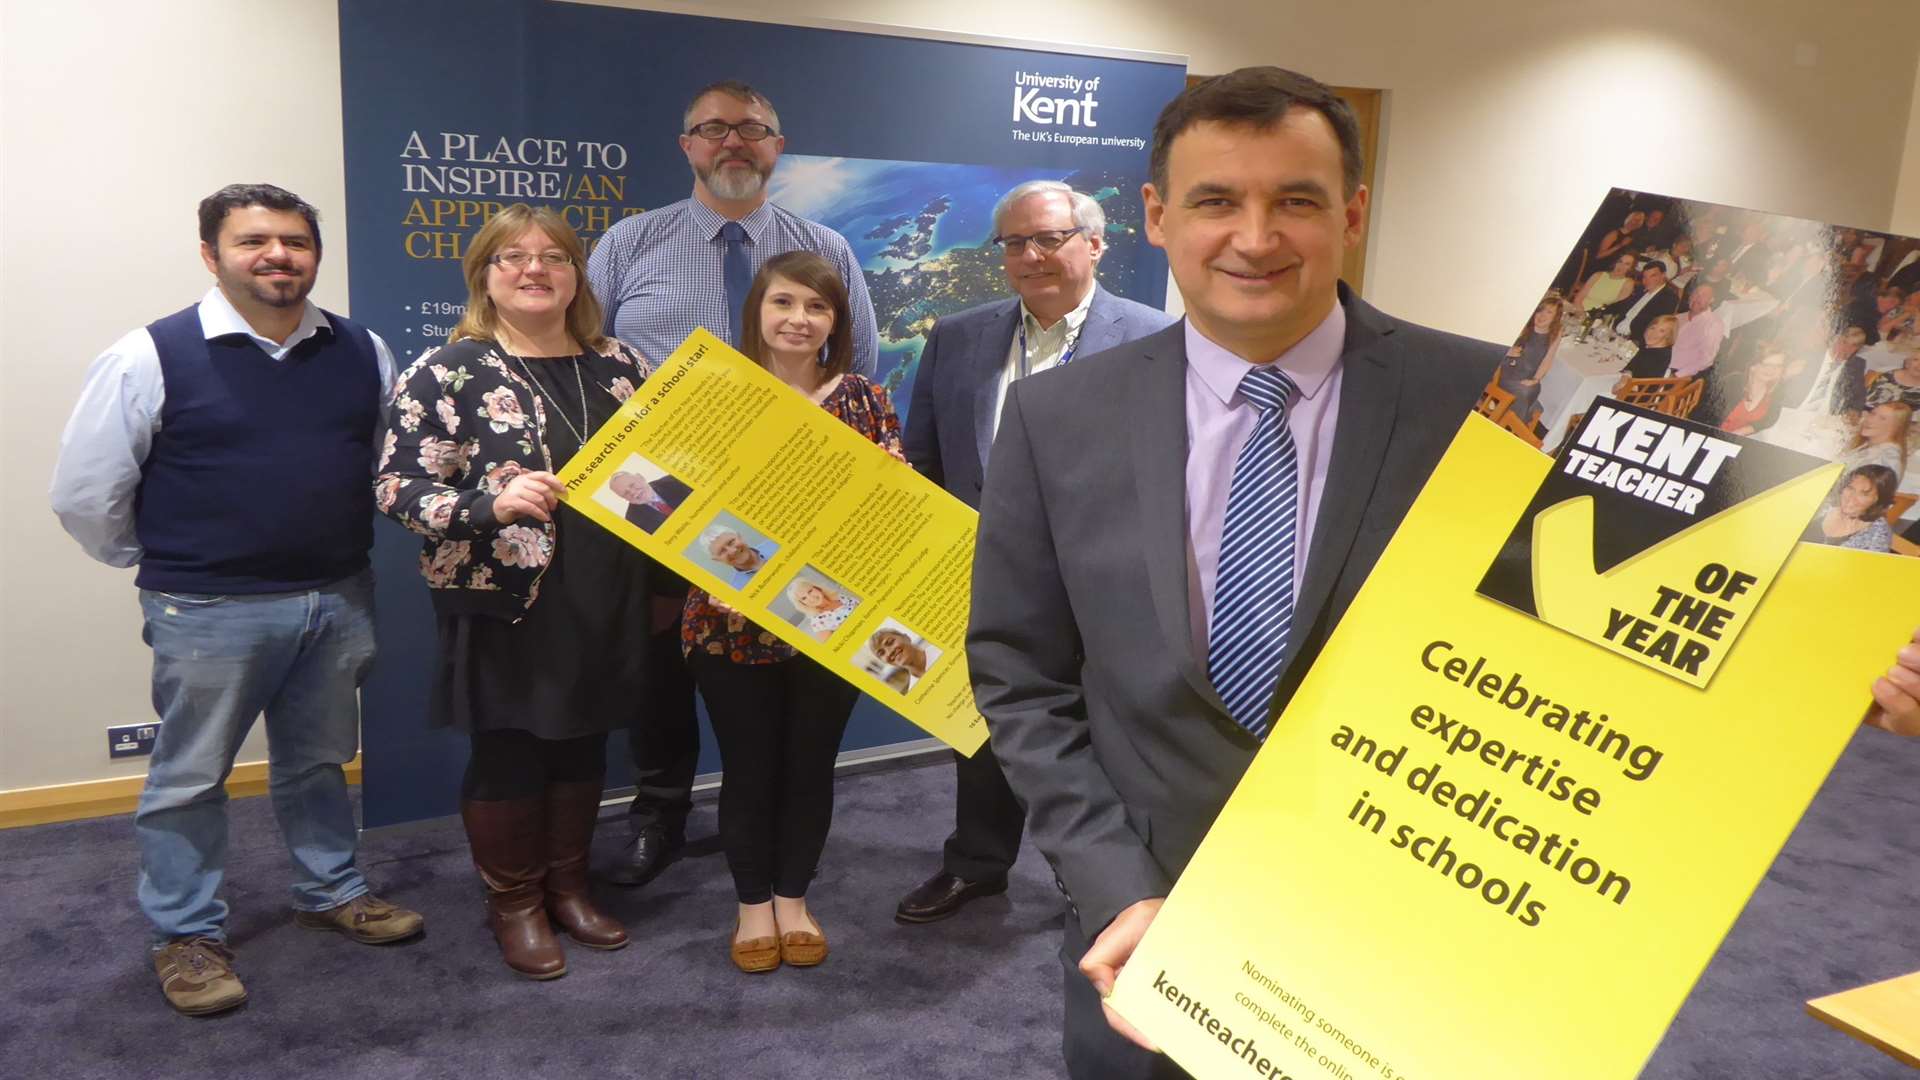 Steven Holdcroft, Assistant Director of Enrolment Management Services at the University of Kent, joins staff to unveil the Kent Teacher of the Year Awards celebrity flyer that will be used to promote the 2018 event.